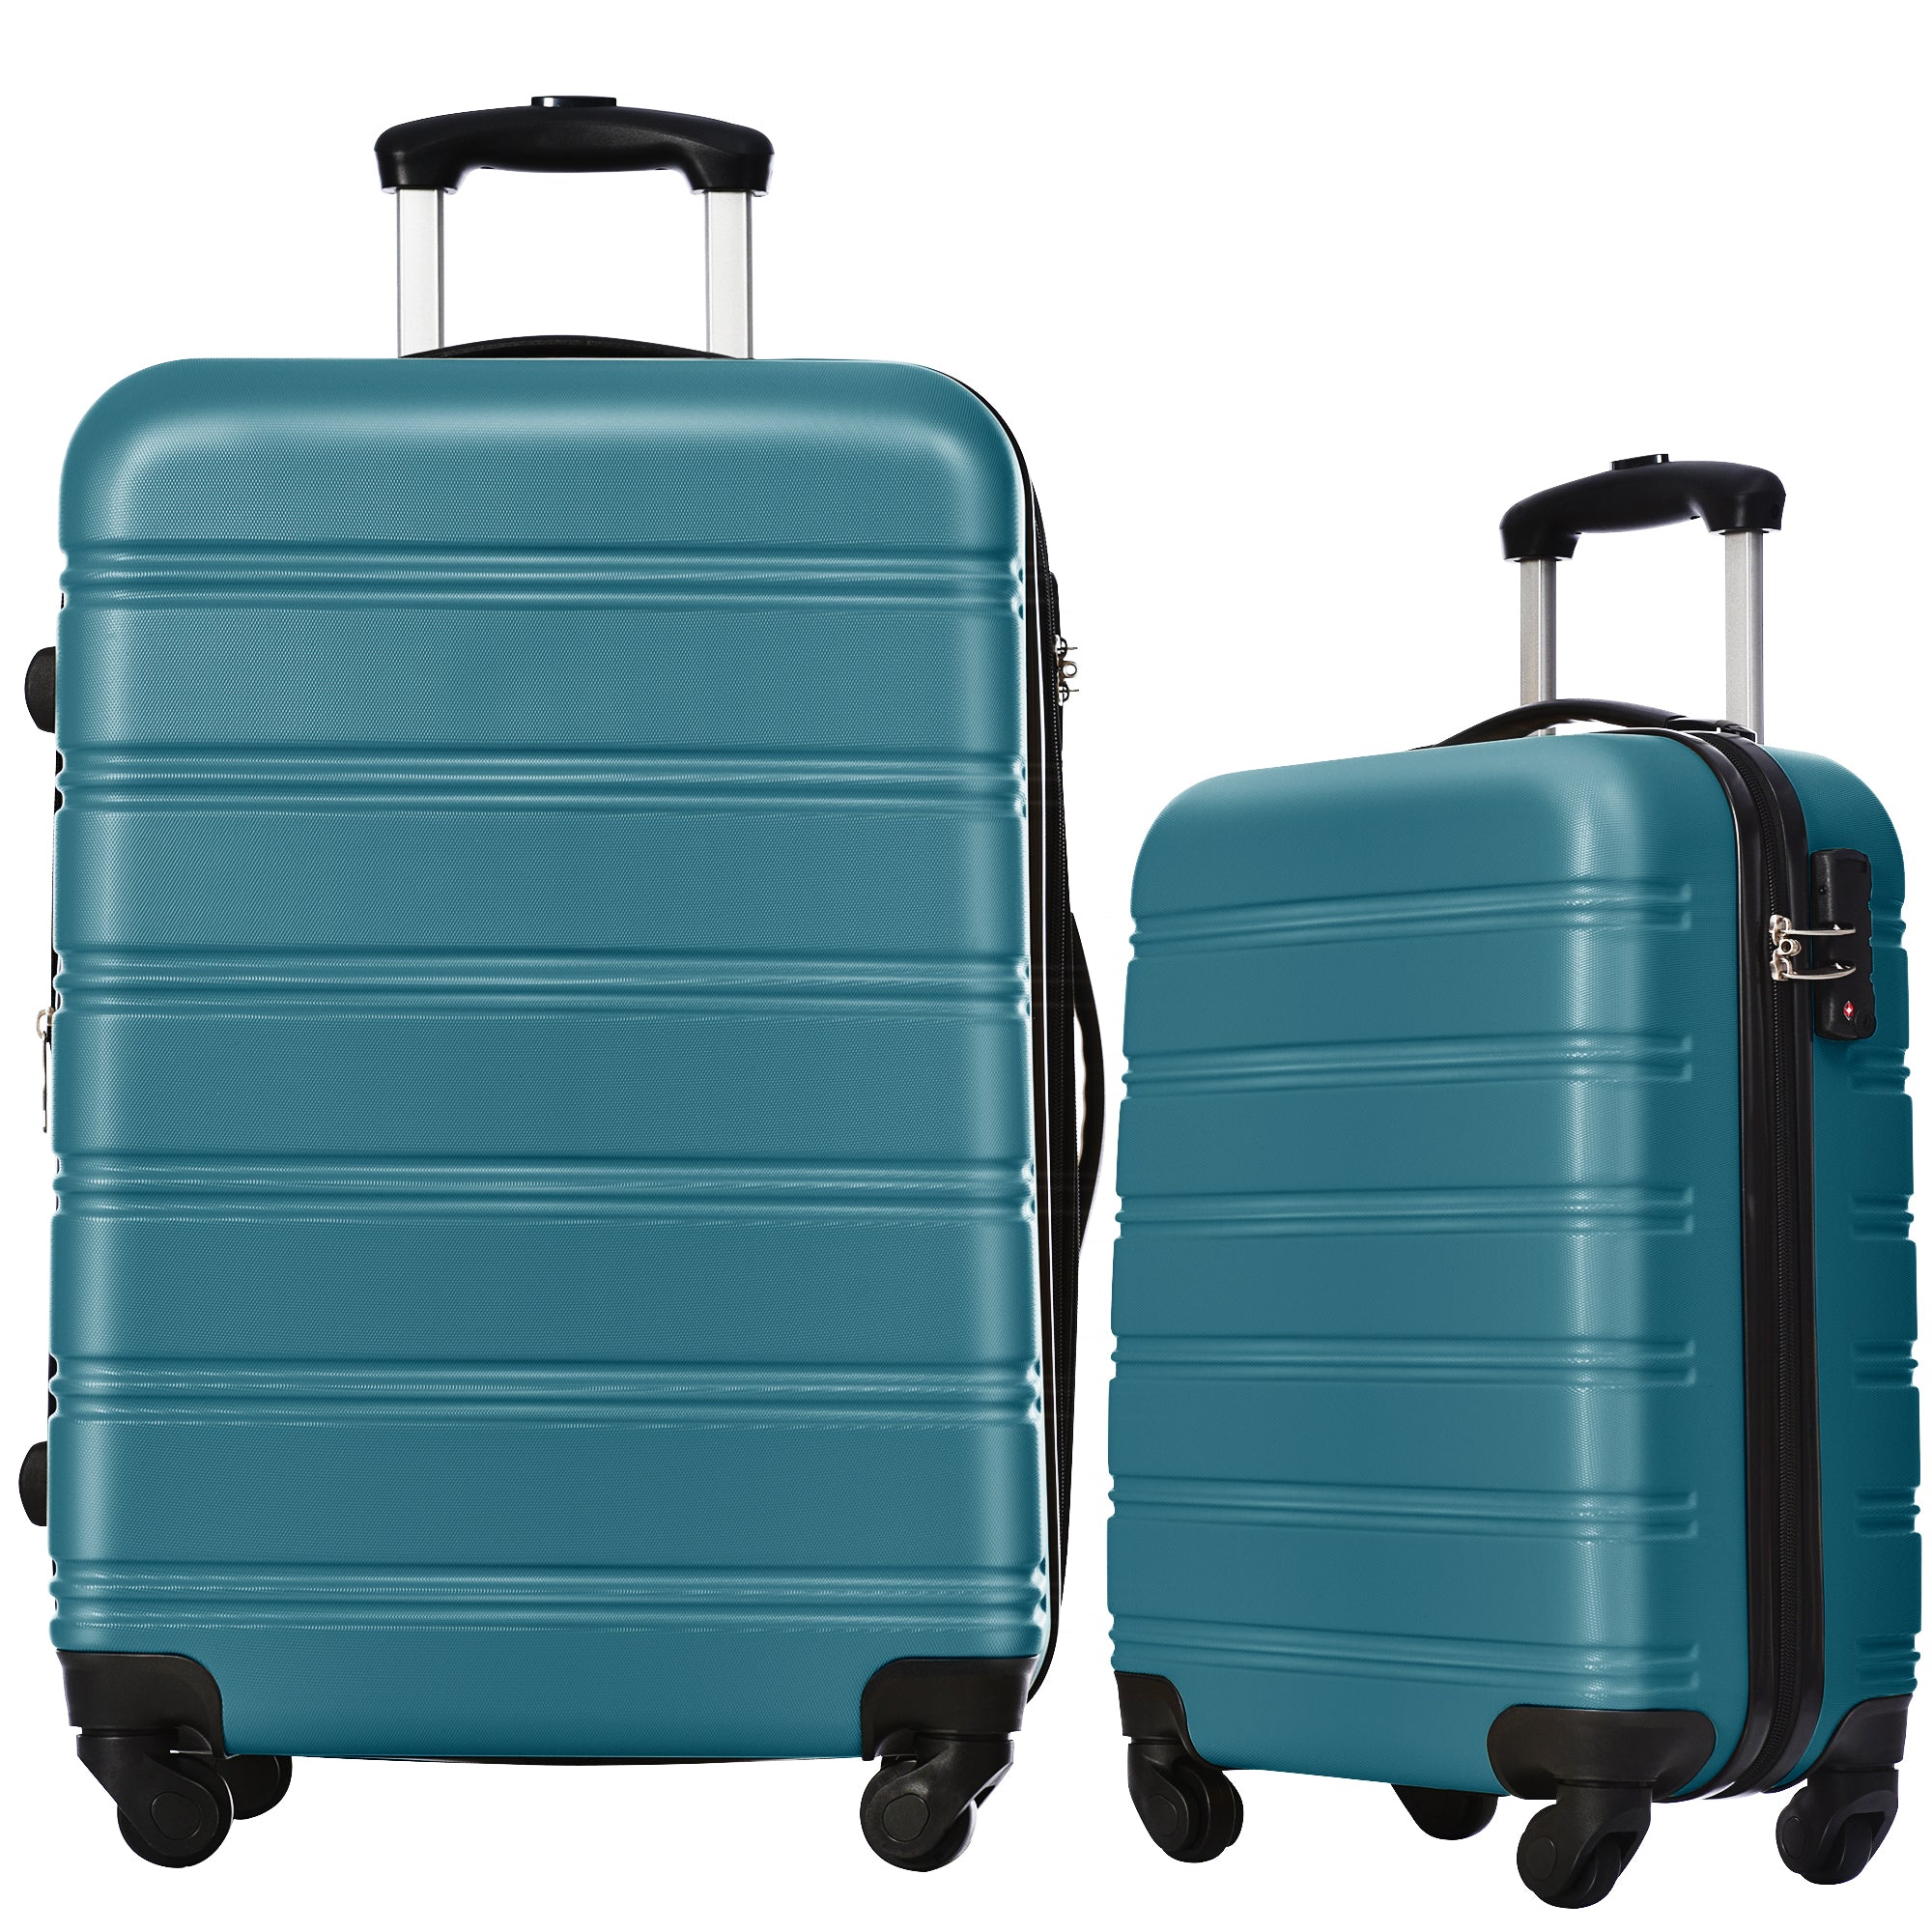 Luggage Sets of 2 Piece Carry on Suitcase Airline dark green-abs